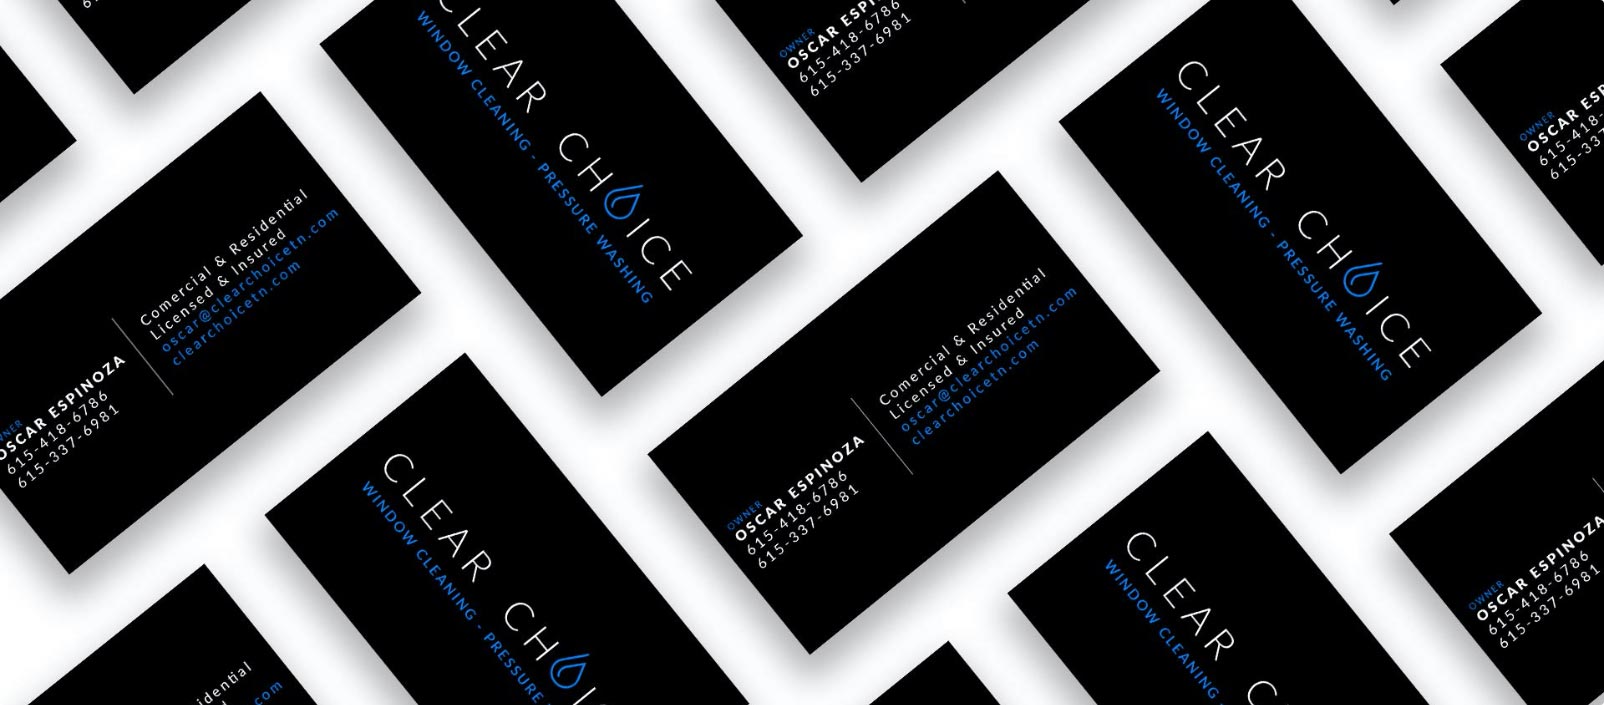 ClearChoiceTN.com Business Cards Design